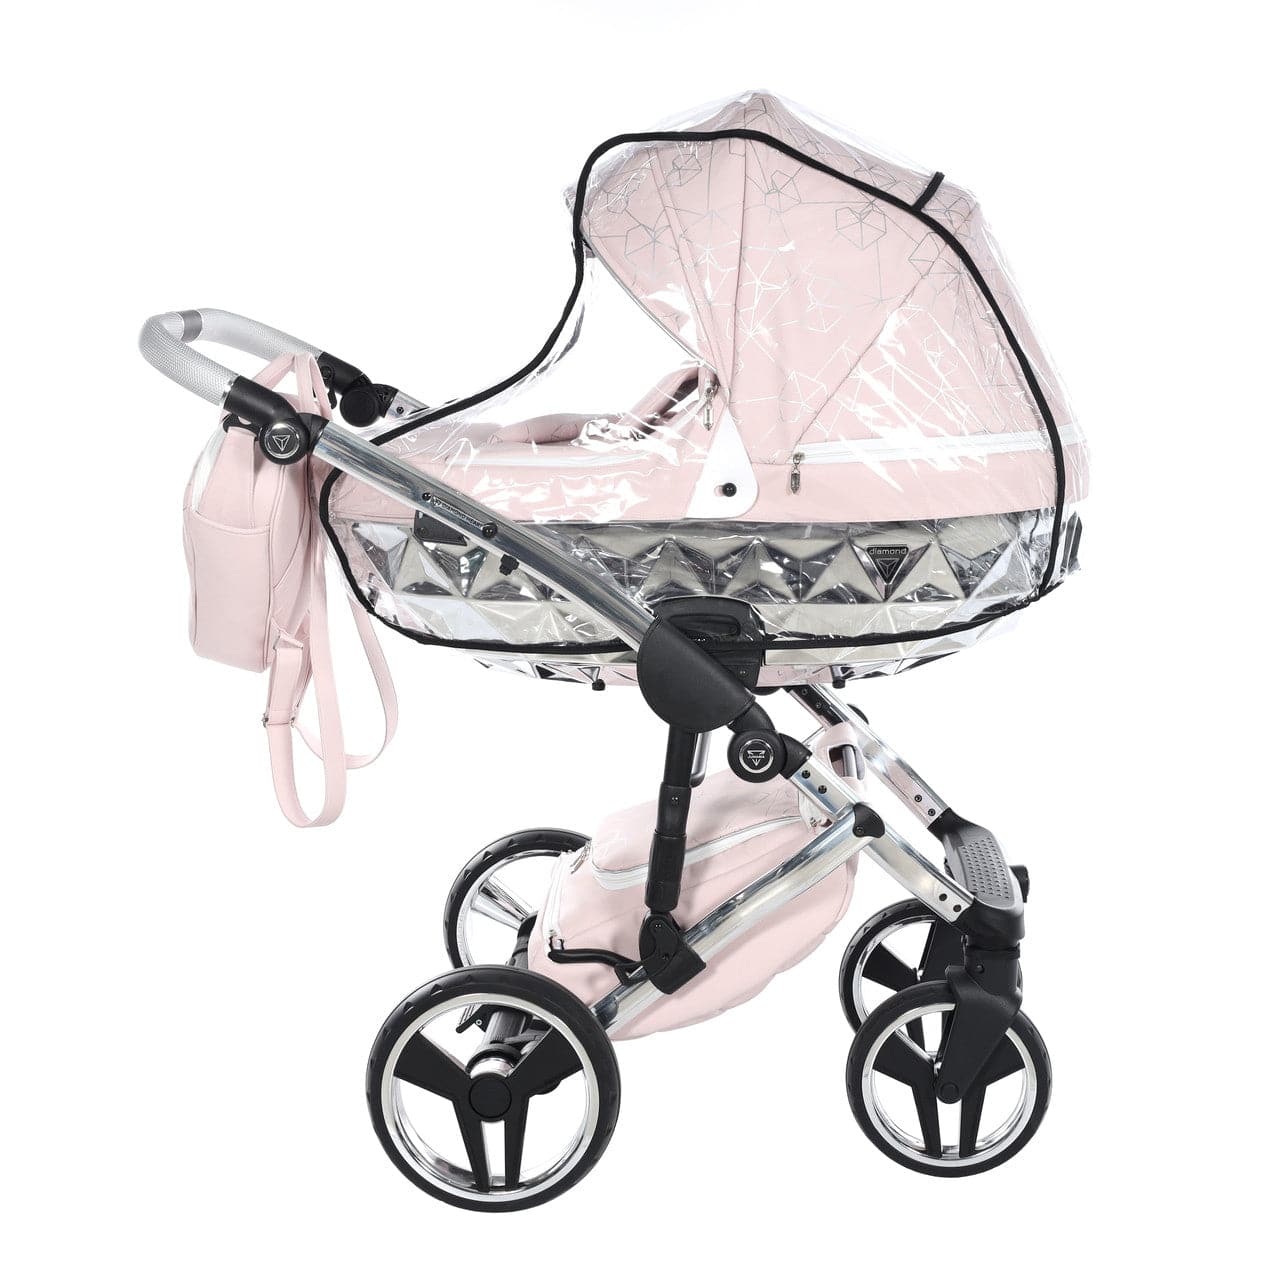 Junama Heart 3 In 1 Travel System - Pink - For Your Little One